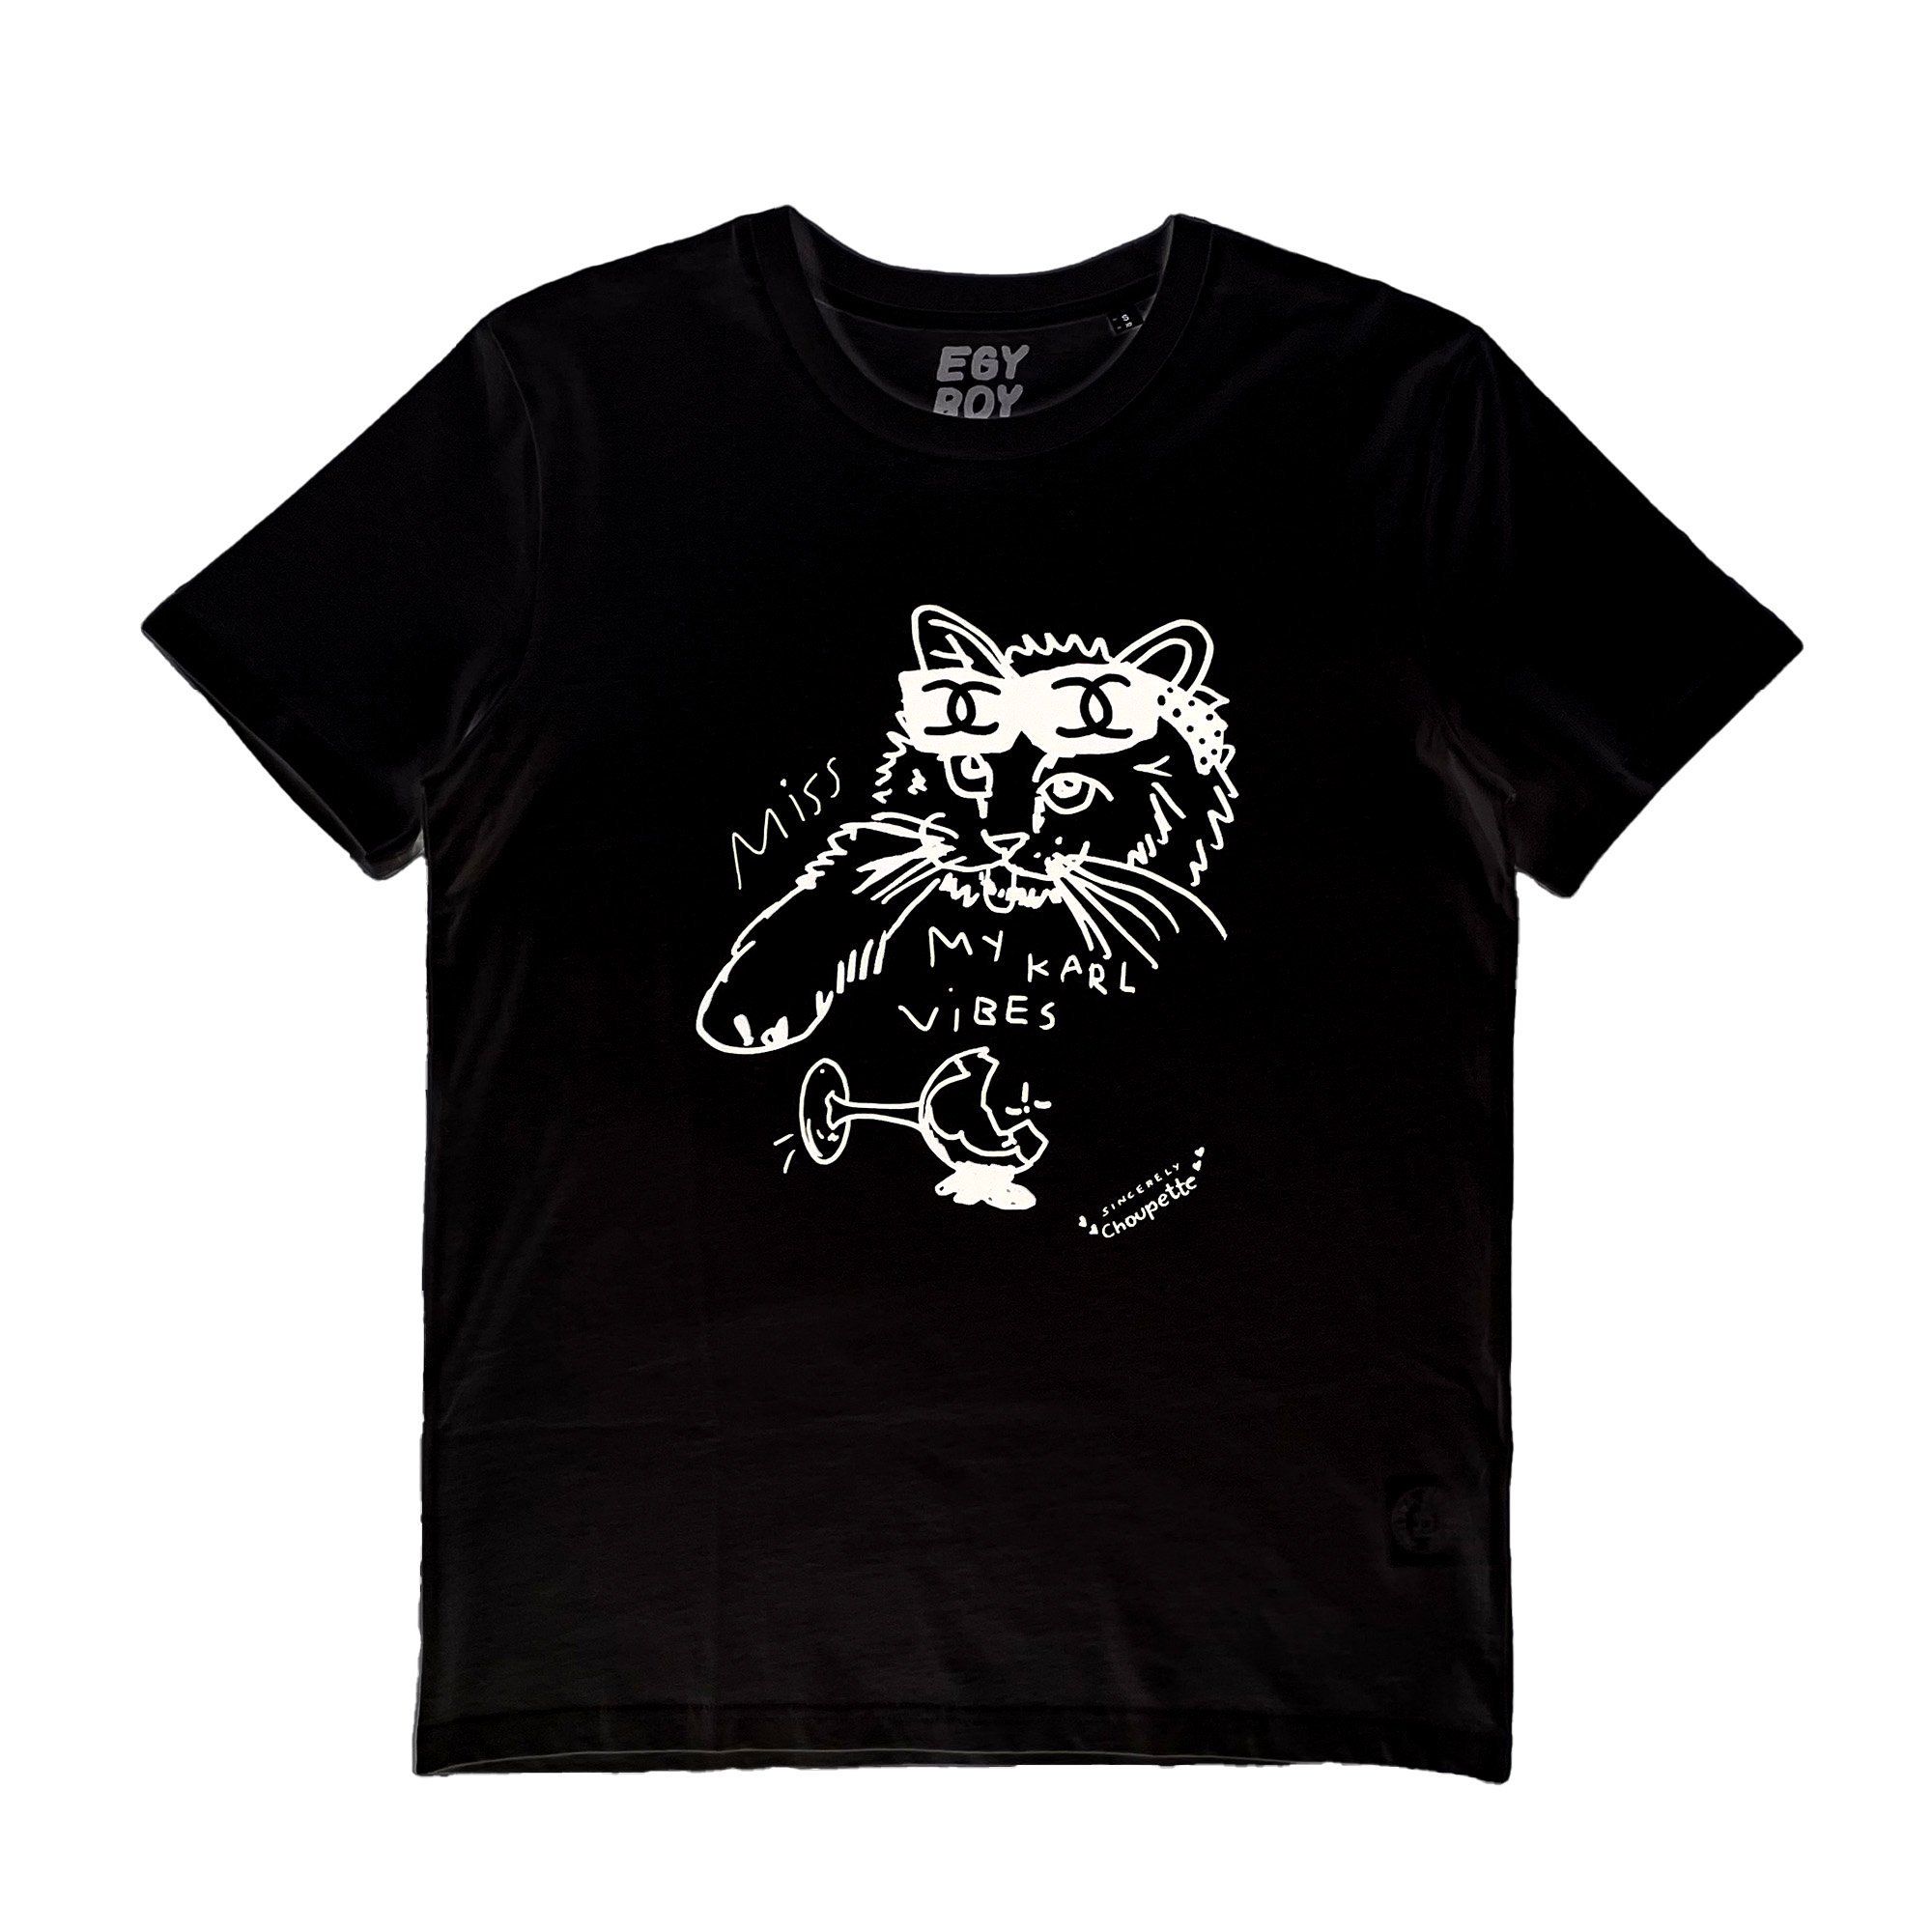 <img class='new_mark_img1' src='https://img.shop-pro.jp/img/new/icons7.gif' style='border:none;display:inline;margin:0px;padding:0px;width:auto;' />EGYBOY T-SHIRT